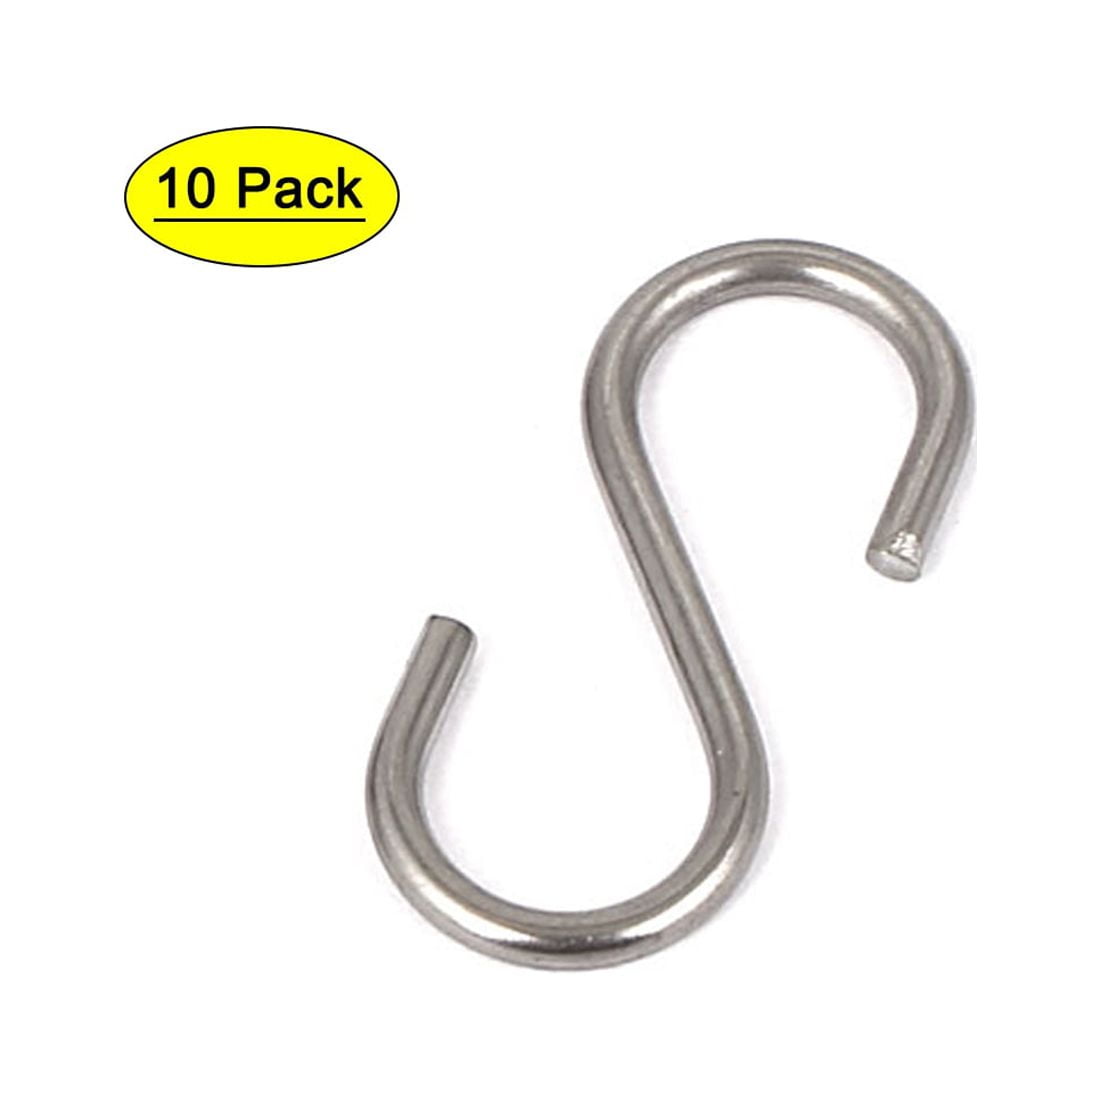 Uxcell 1.2 Length Metal Silver Tone Baskets S Hooks for Hanging, 10 Pack 